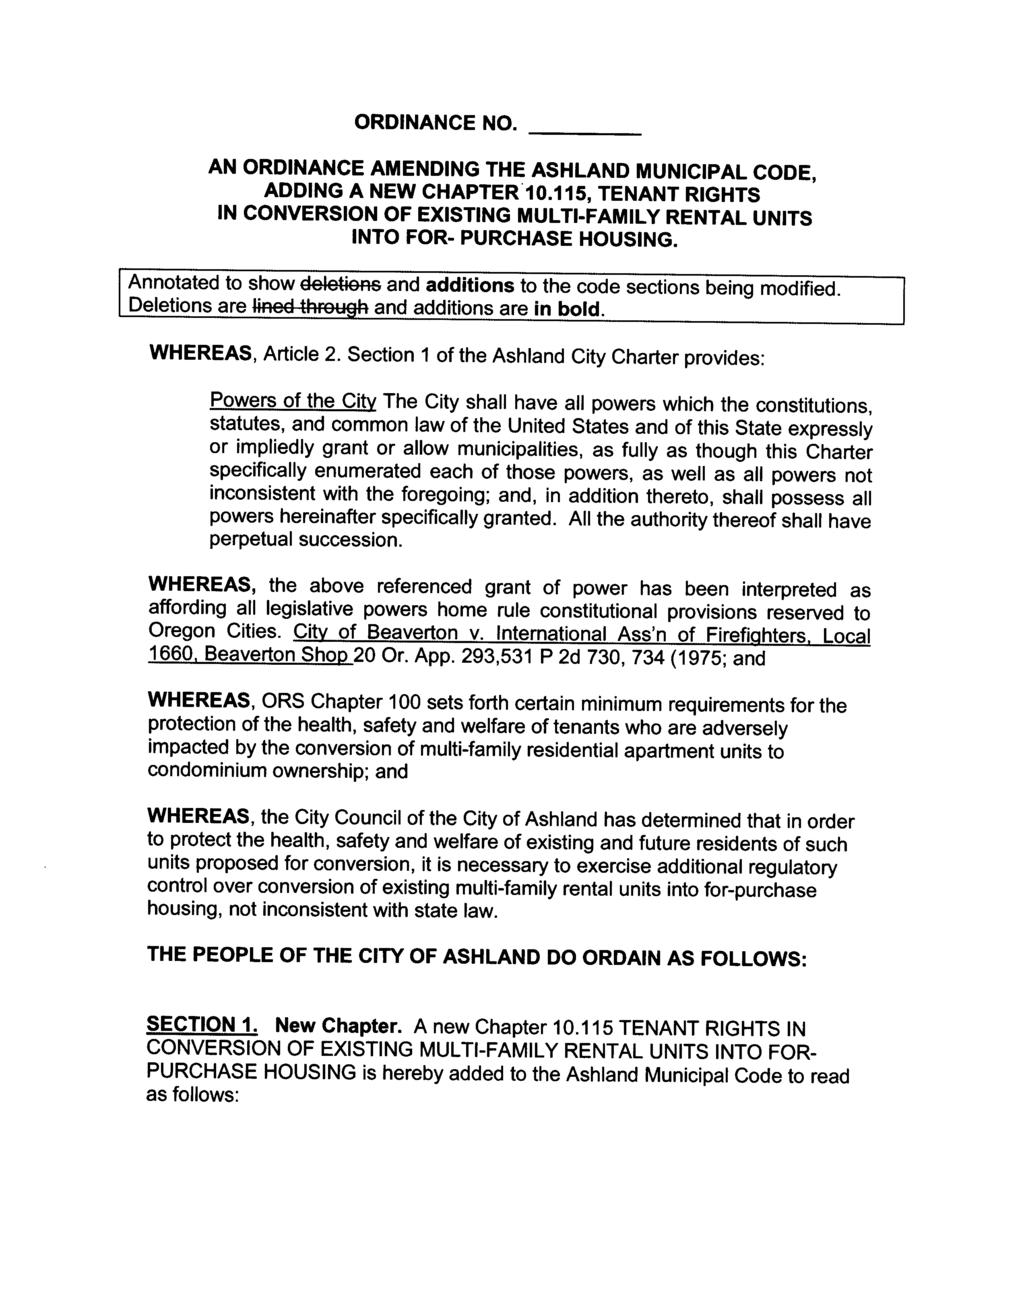 ORDINANCE NO AN ORDINANCE AMENDING THE ASHLAND MUNICIPAL CODE ADDING A NEW CHAPTER 10 115 TENANT RIGHTS IN CONVERSION OF EXISTING MULTI FAMILY RENTAL UNITS INTO FOR PURCHASE HOUSING Annotated to show